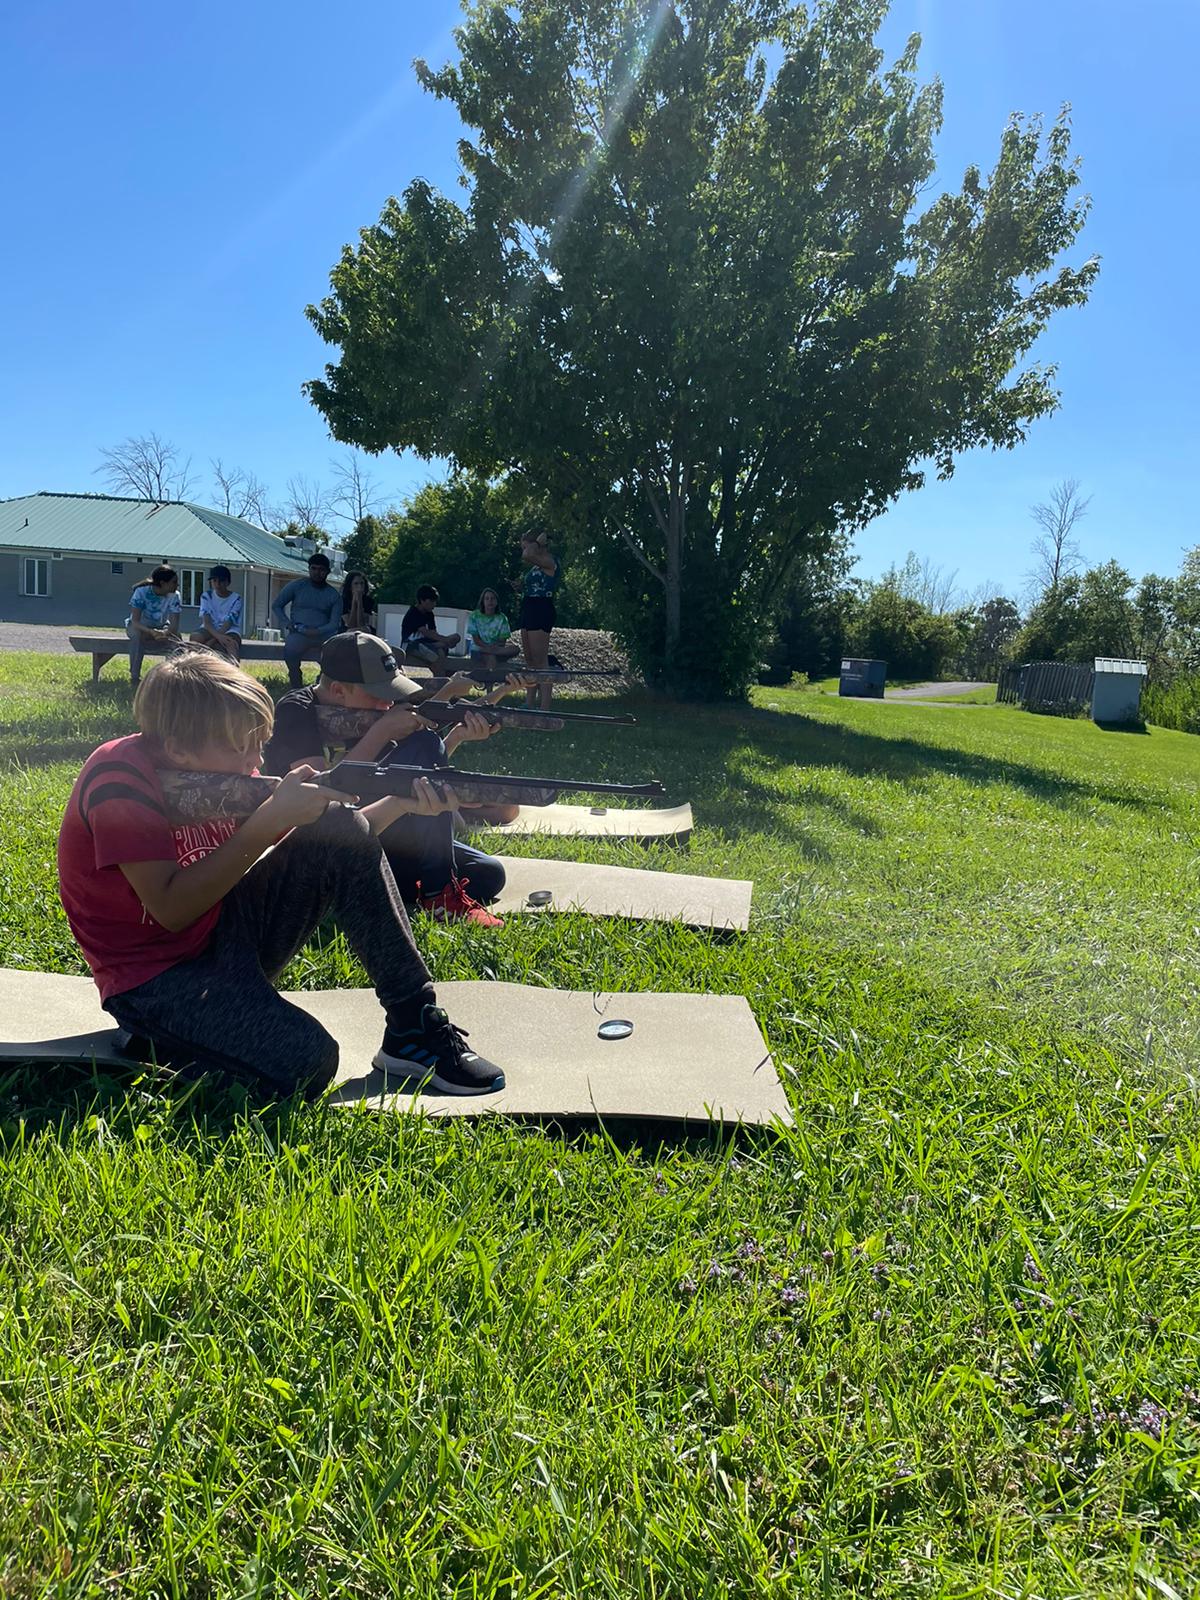 Campers take part in air rifle target practice